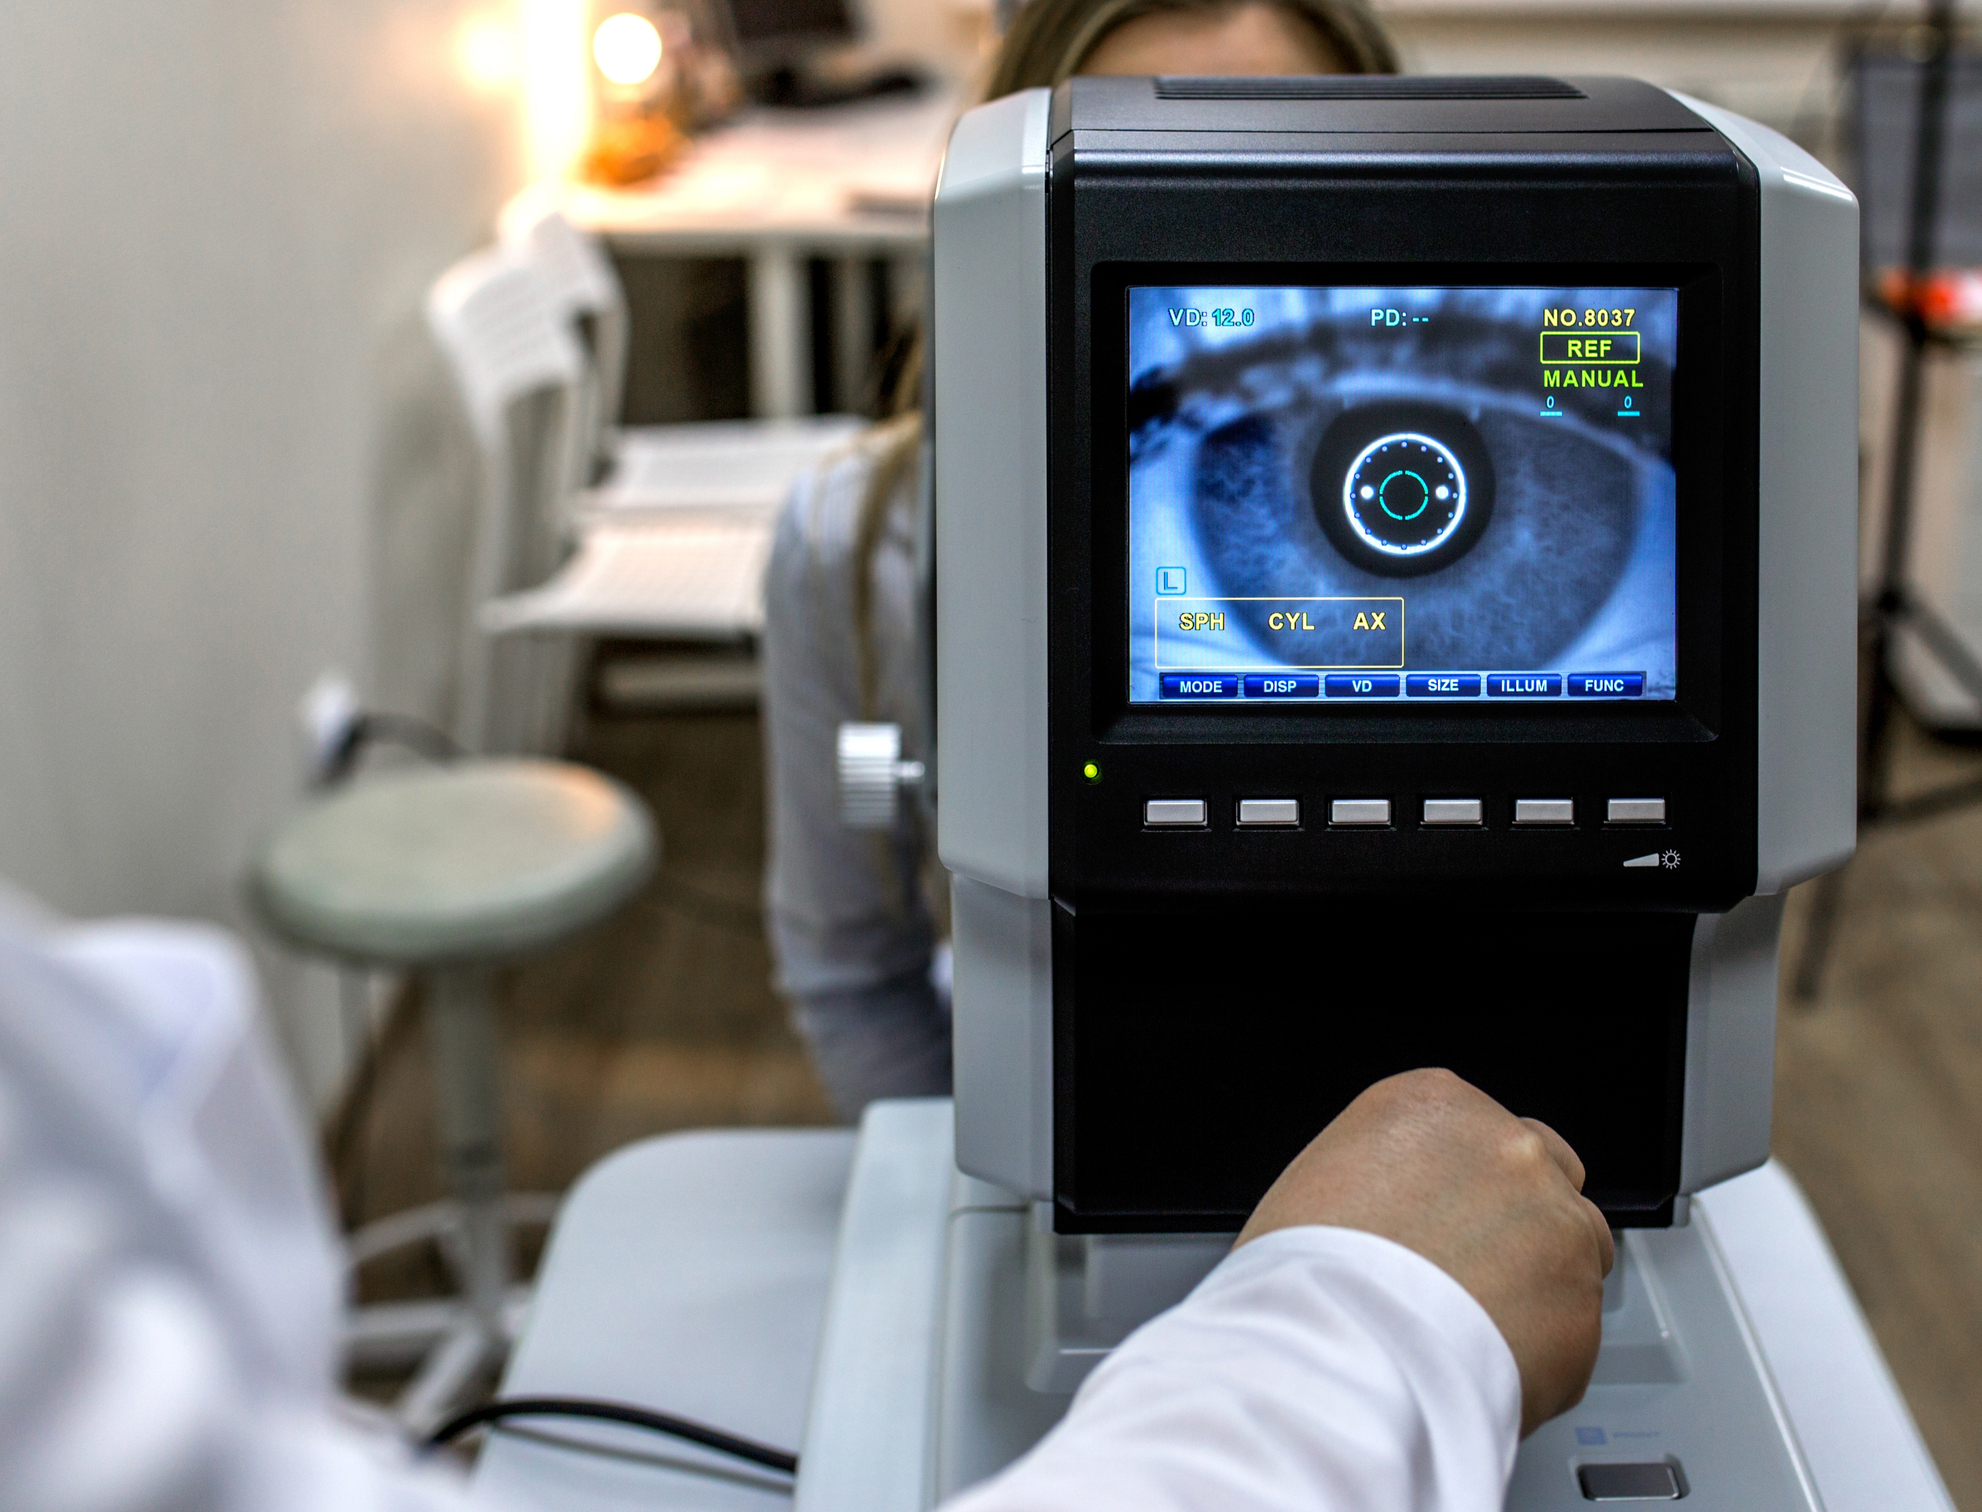 Automated Diagnosis Systems for Eye Conditions